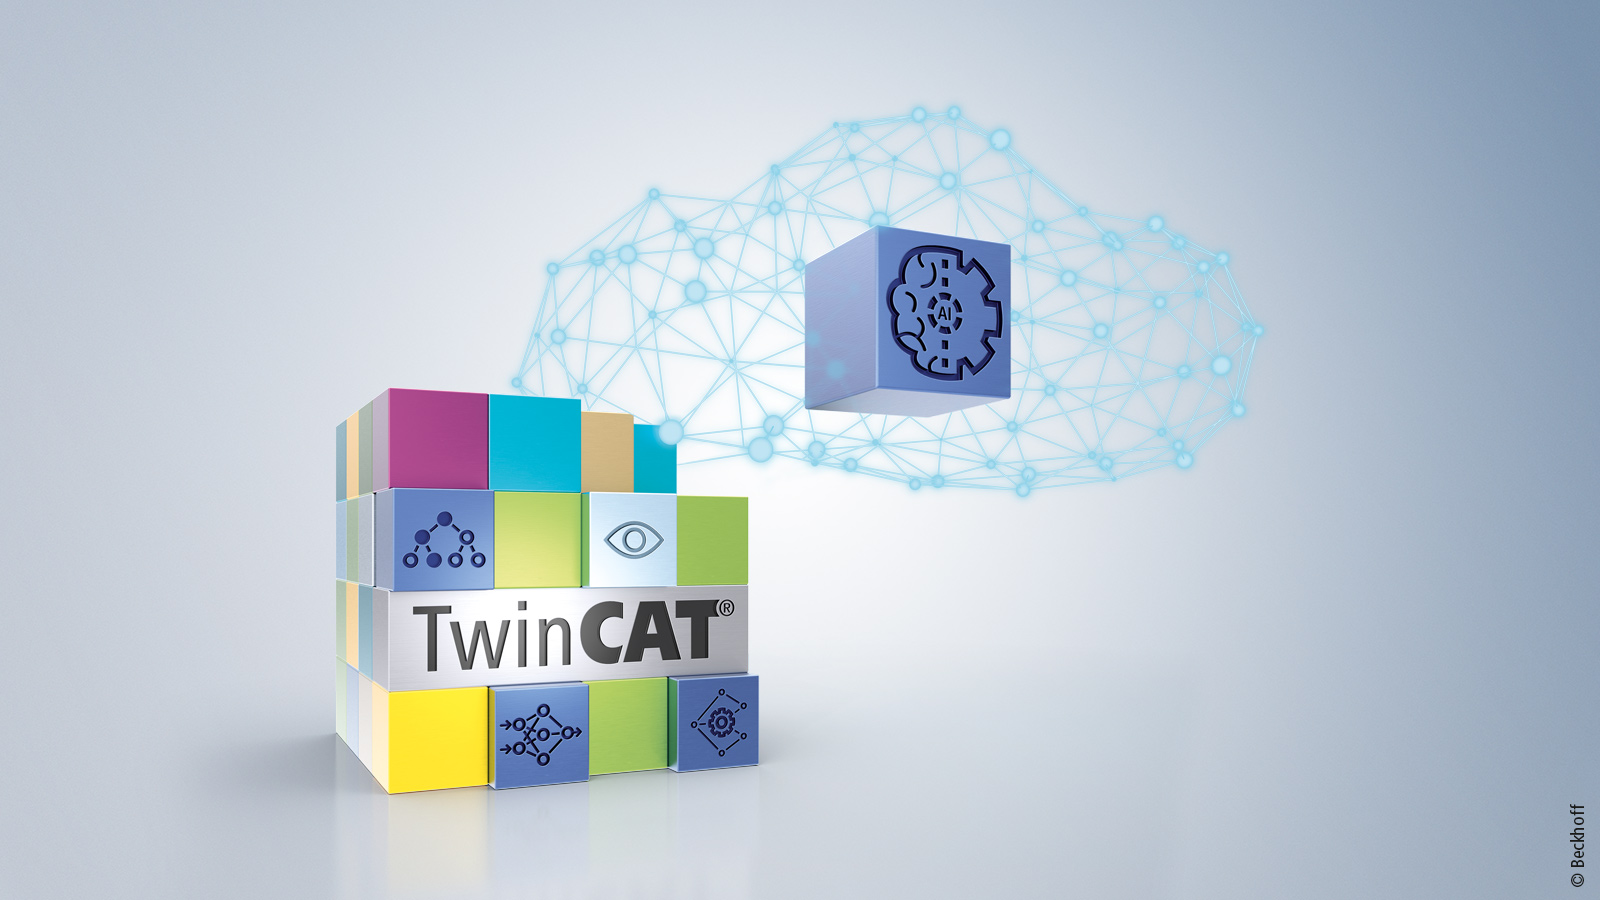 TwinCAT Machine Learning Creator automates the training of AI models and simplifies their use for industrial applications